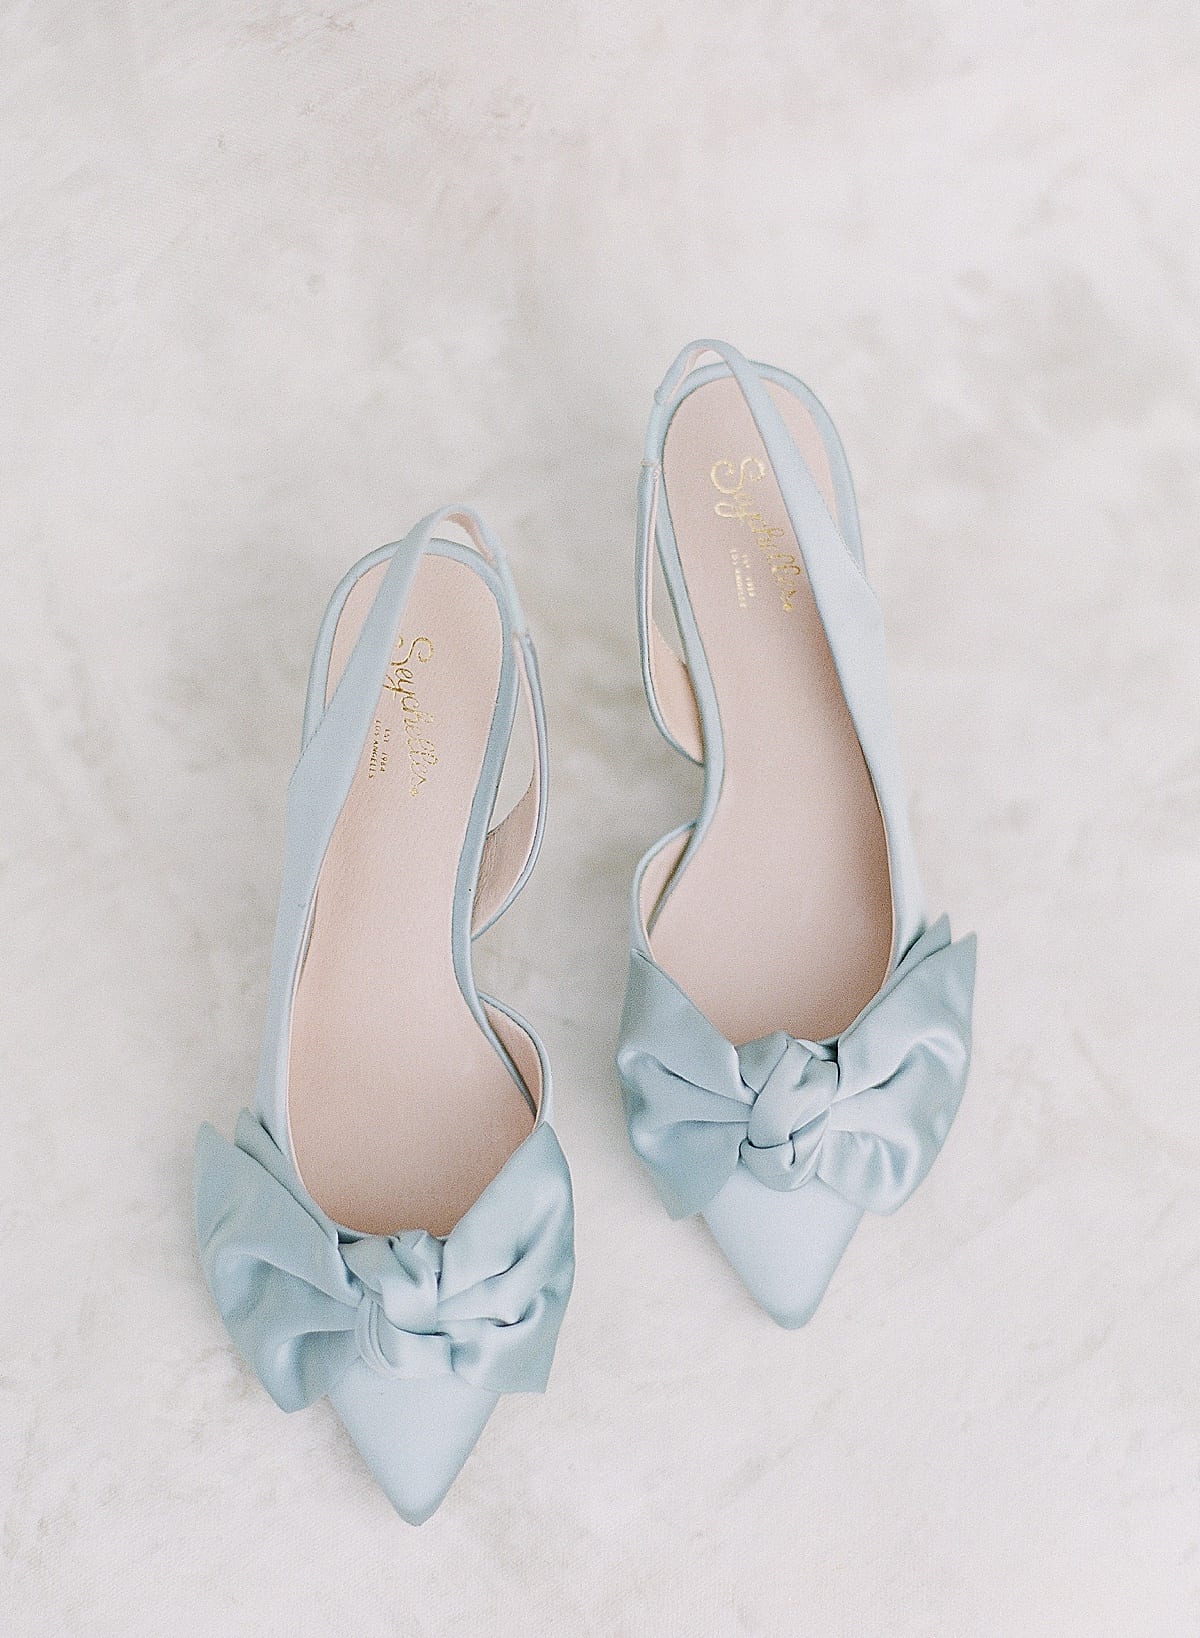 Designer Wedding Shoes Blue Heels with Bow on the toe Photo